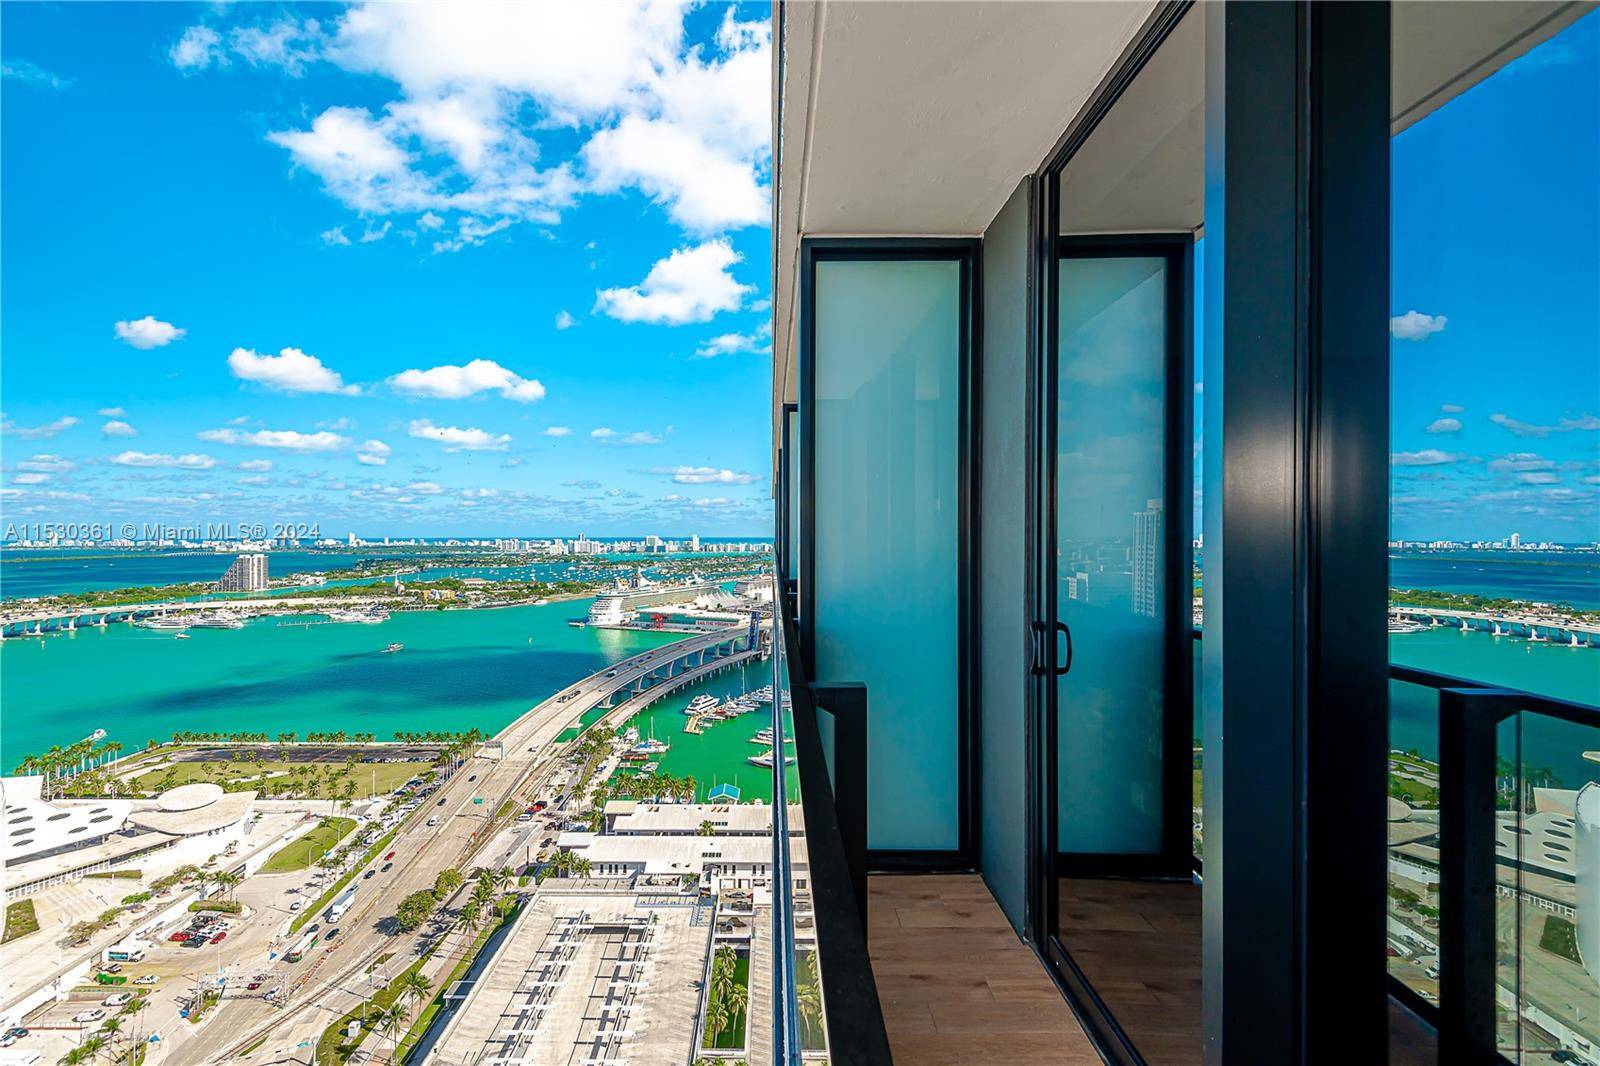 Experience luxury living with breathtaking views of Biscayne Bay and Downtown Miami in this brand new studio.